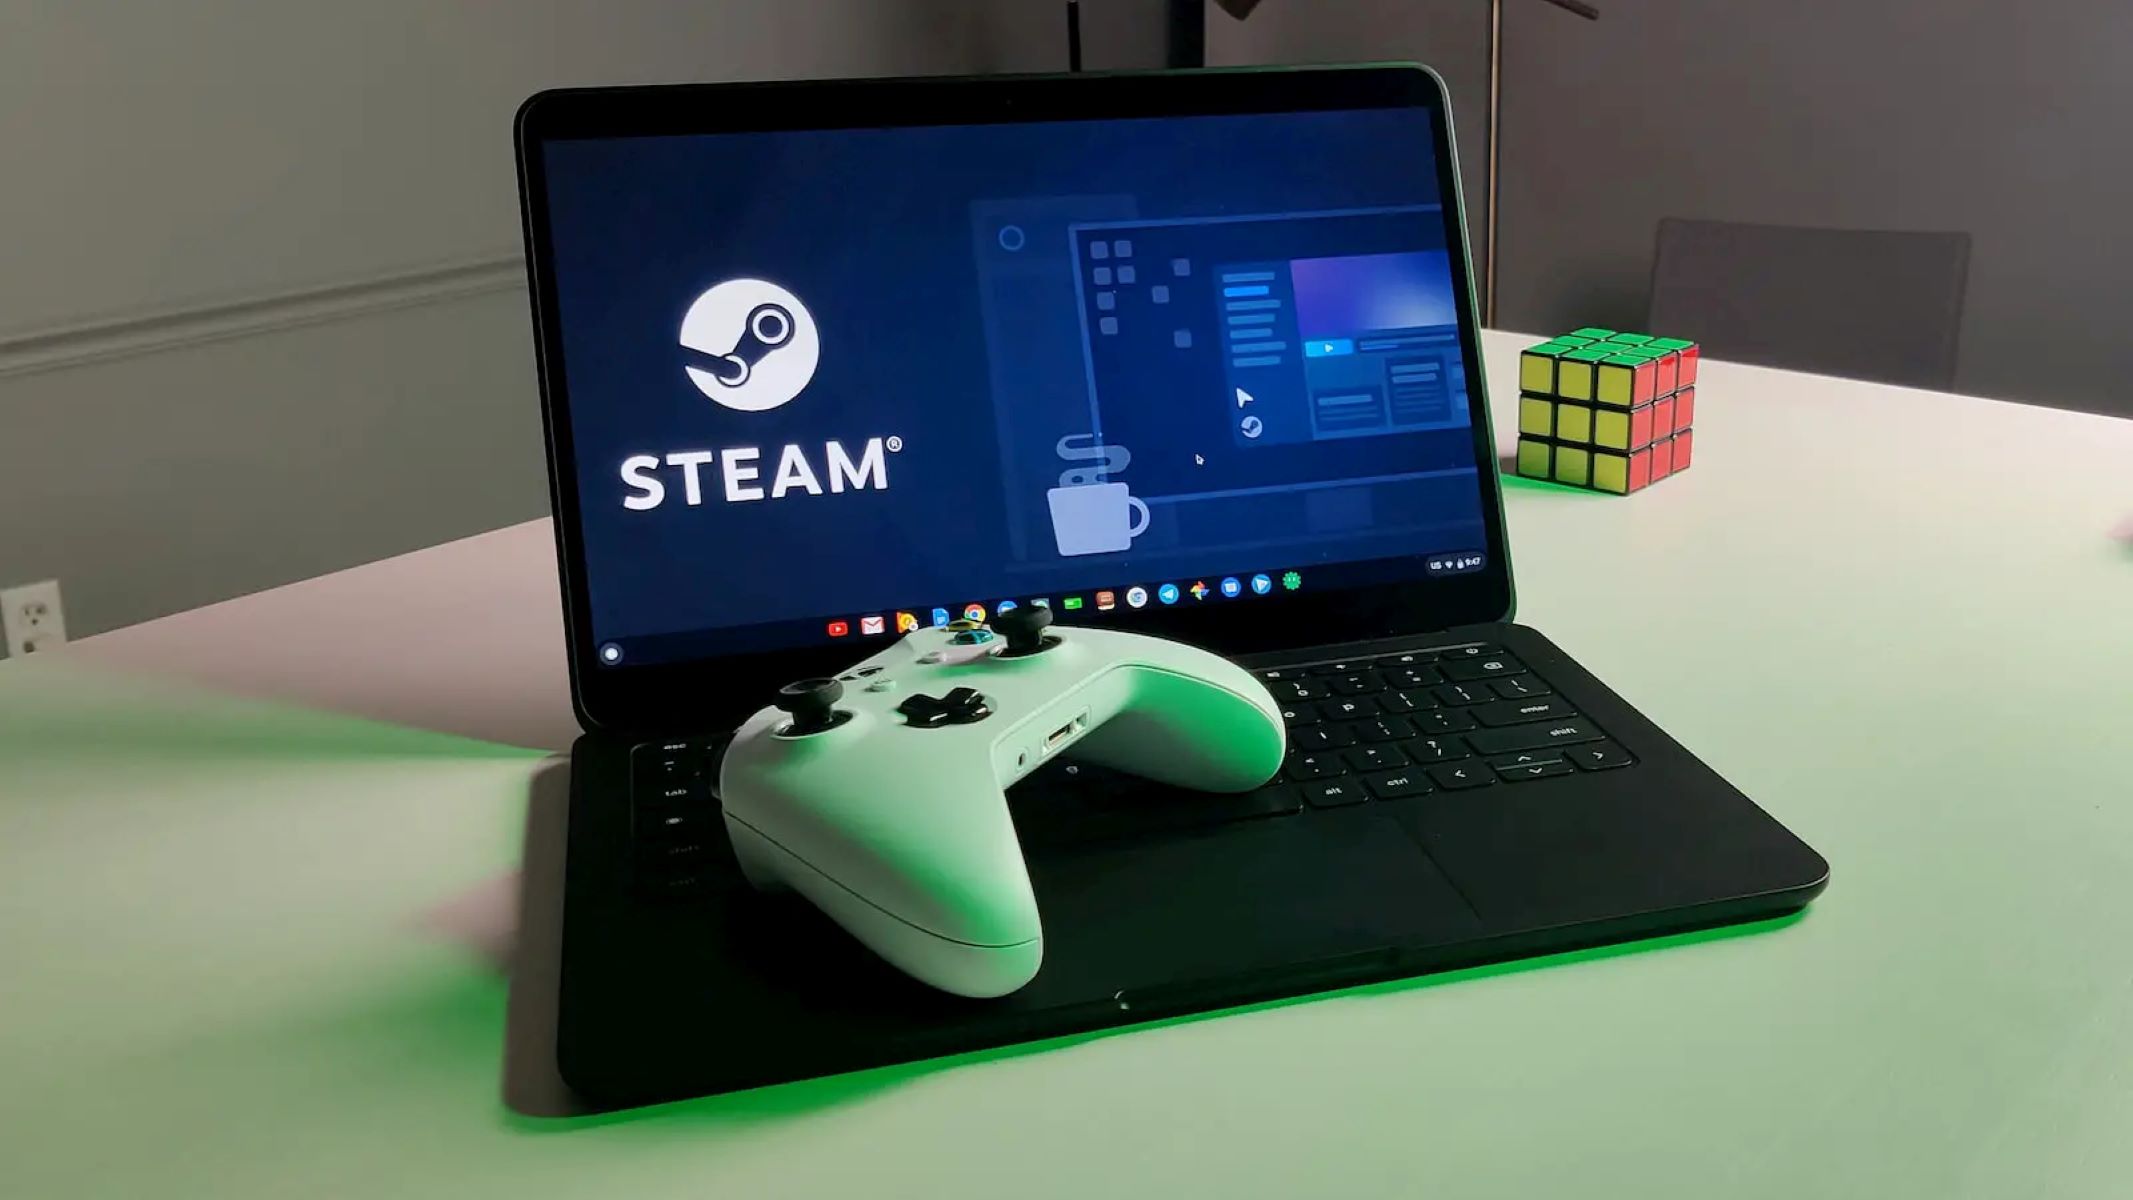 How To Use Steam On Chromebook